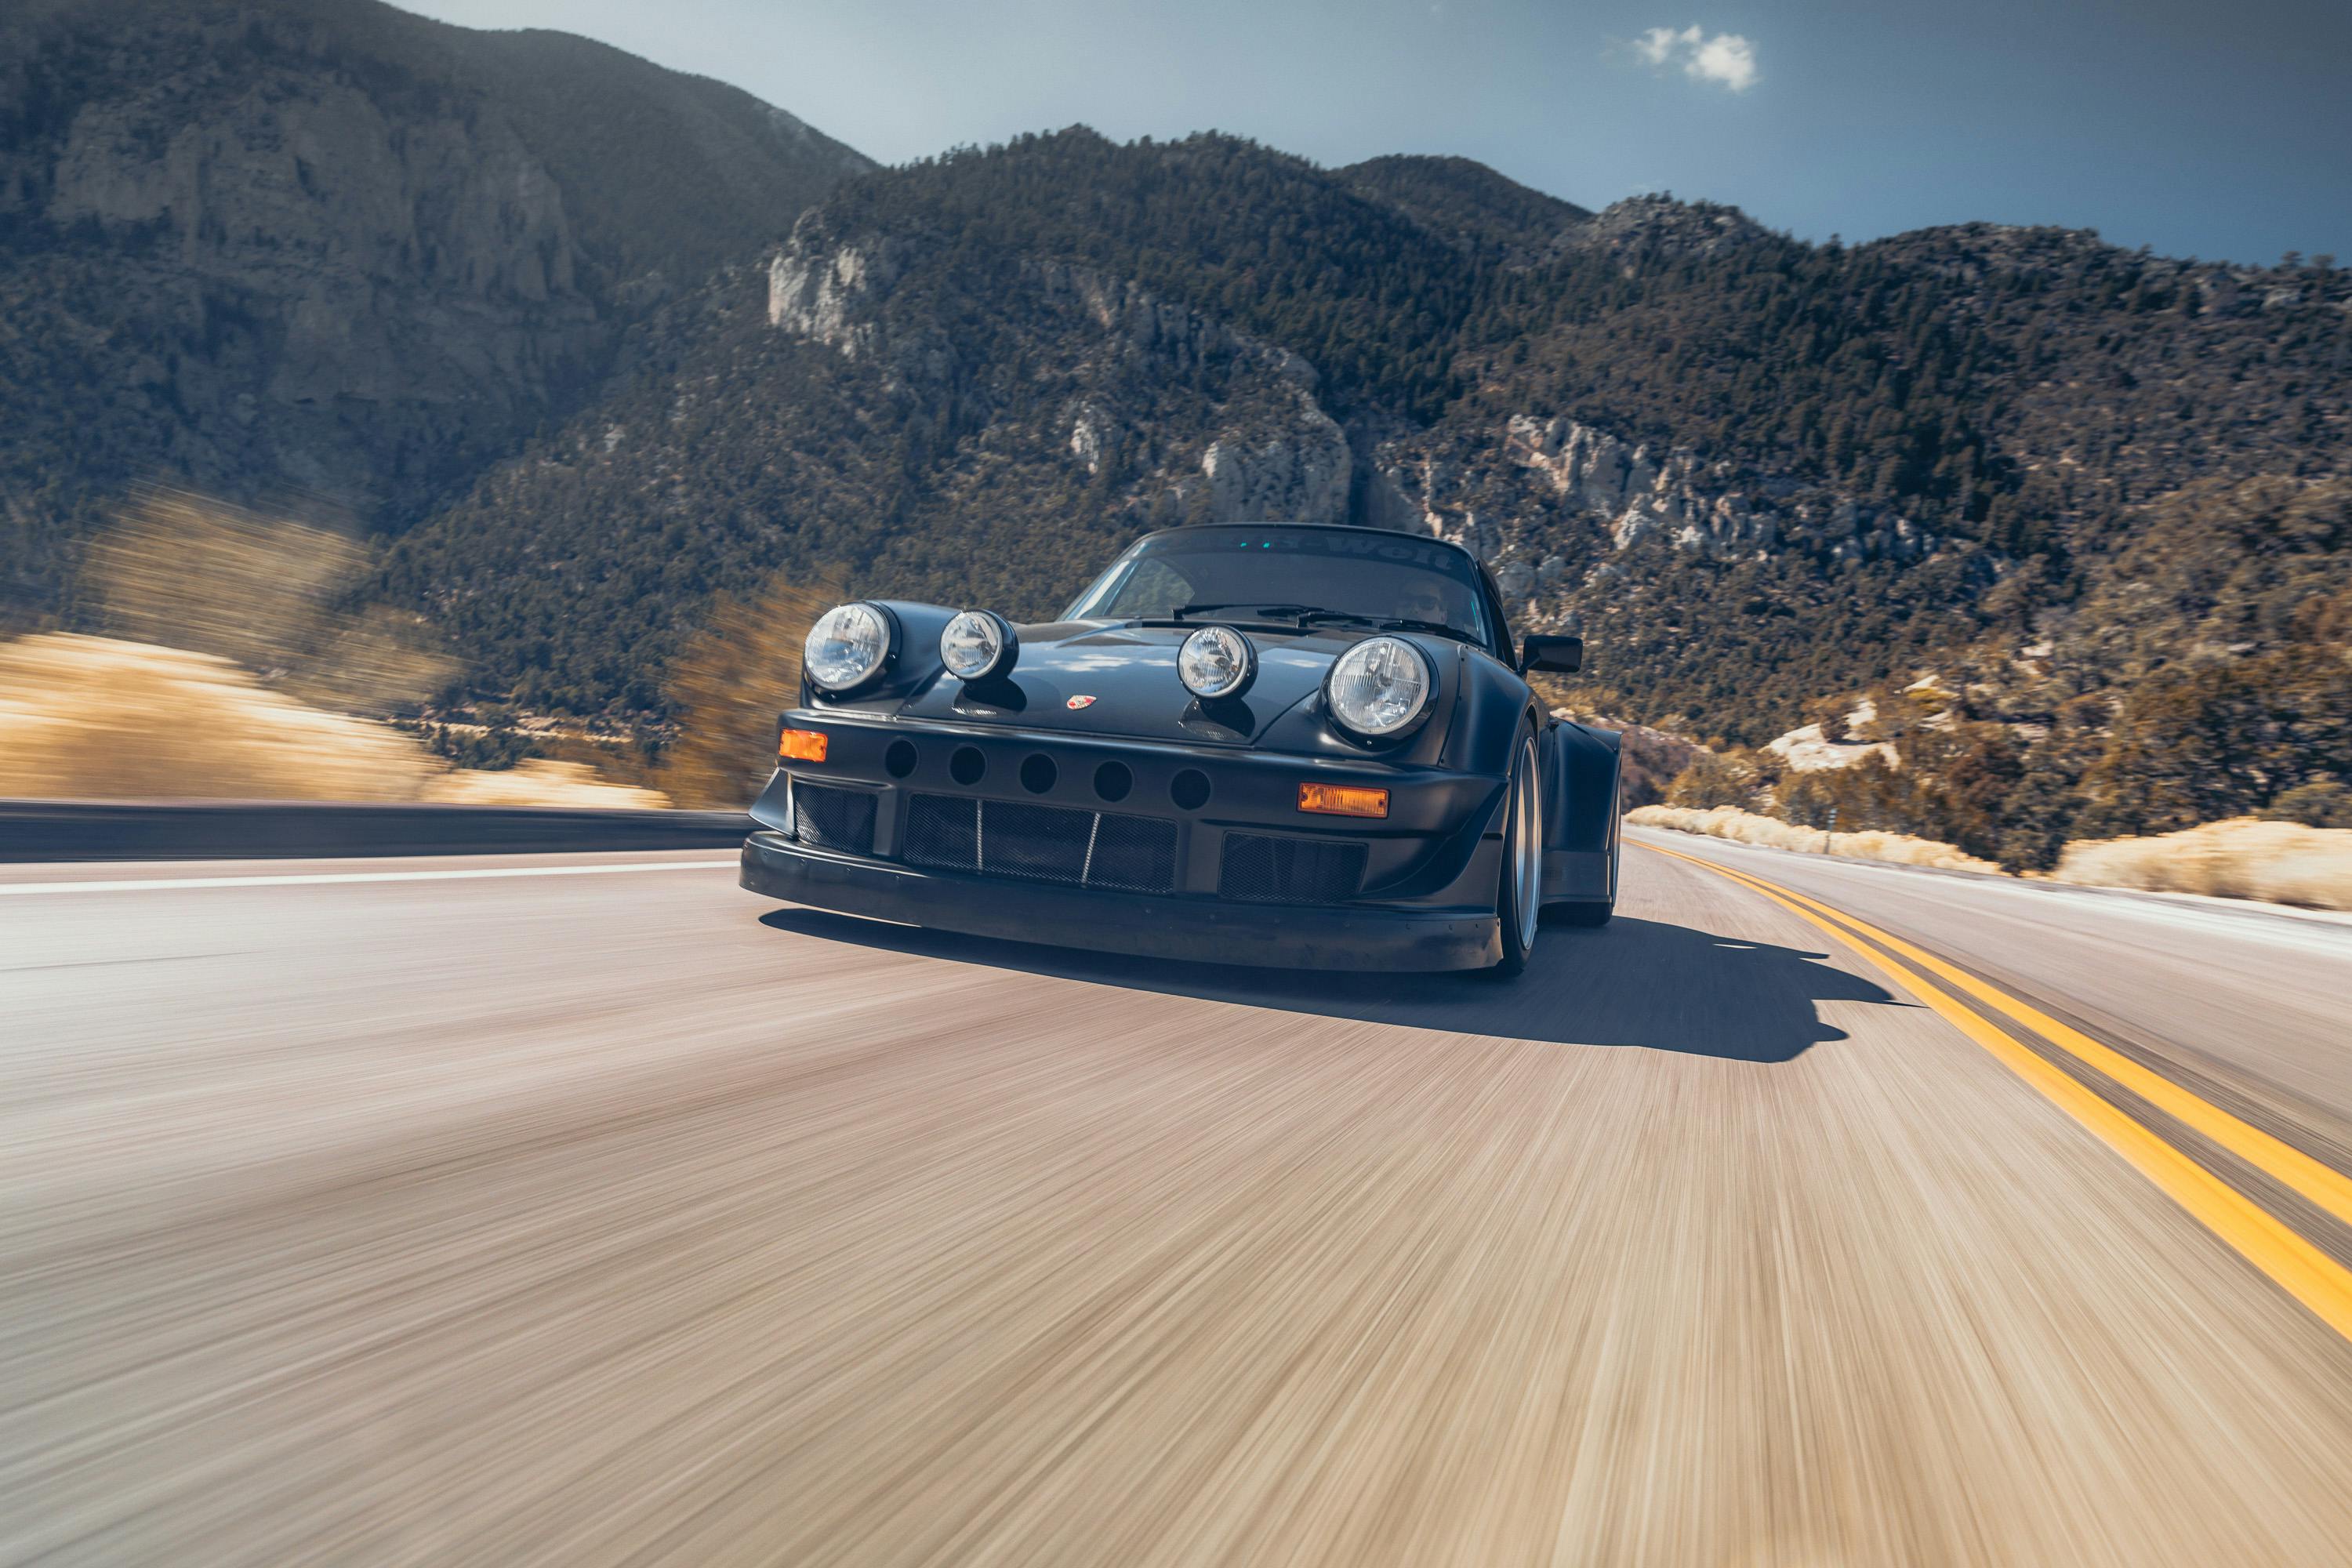 Front end shot of the Need for Speed Porsche 964 in the canyons of Nevada